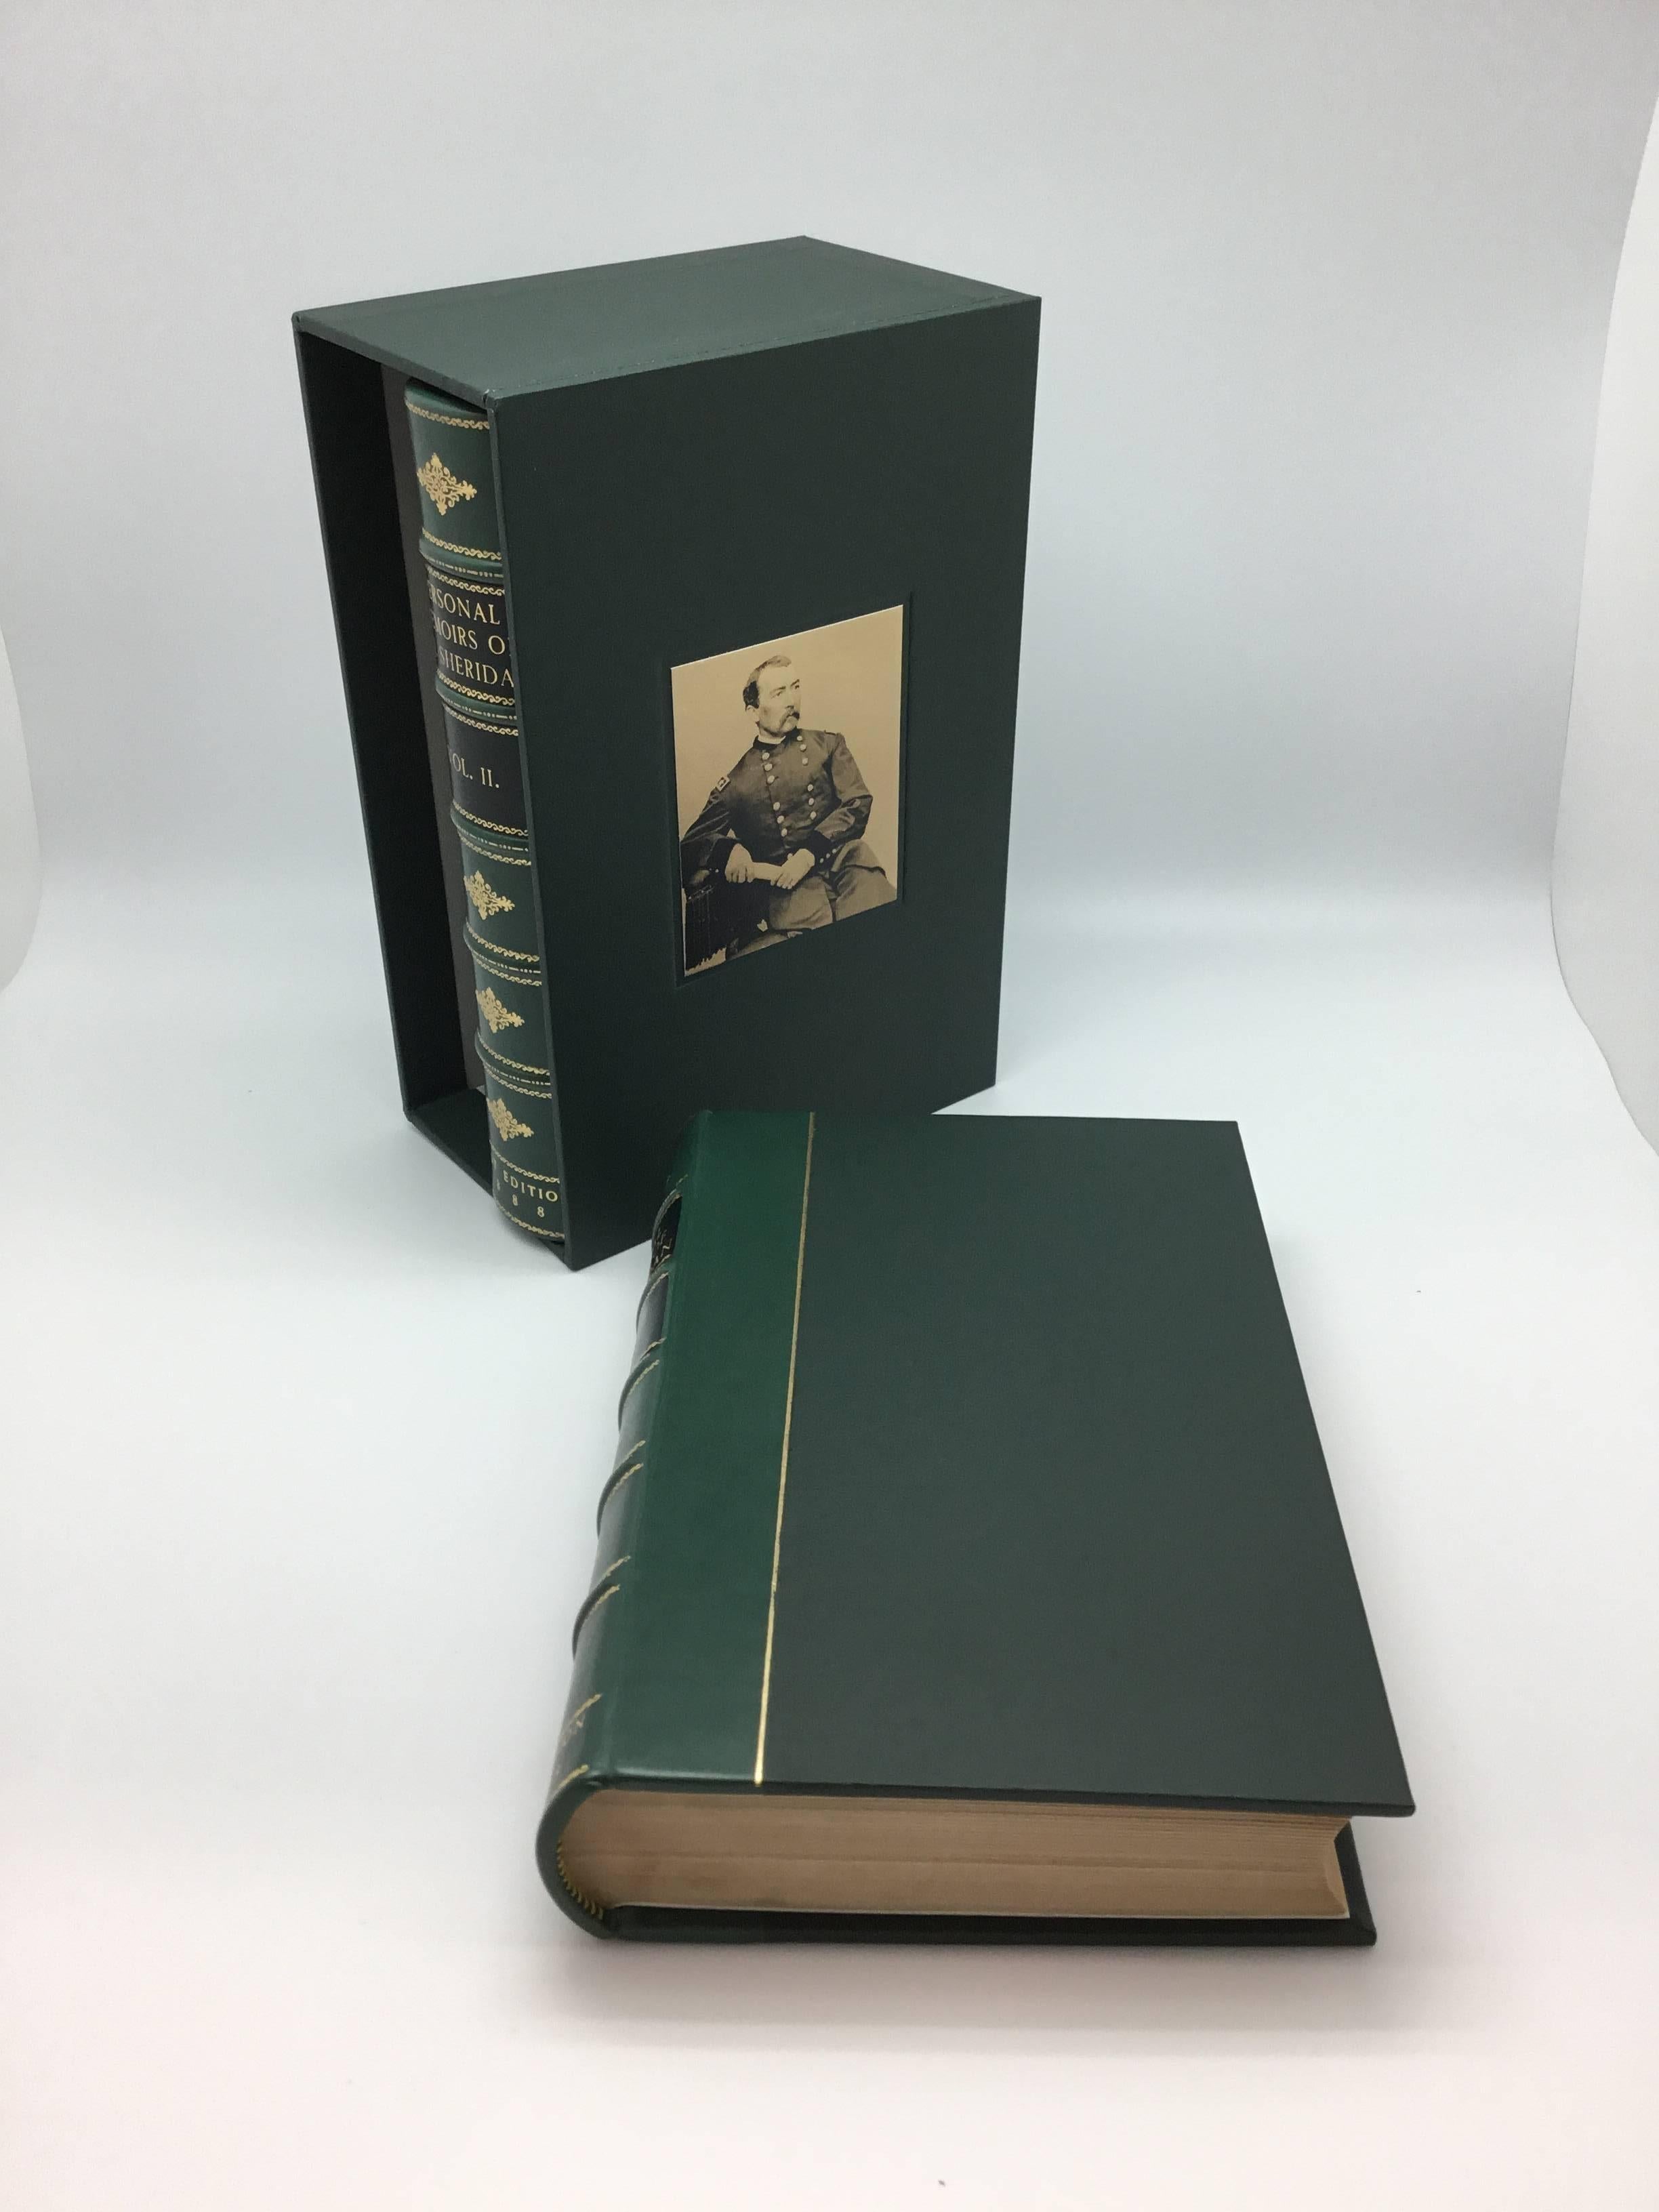 Sheridan, Philip Henry. Personal Memoirs of P.H. Sheridan, General United States Army. New York: Charles L. Webster & Company, 1888. First Edition. Rebound in green quarter leather and cloth boards. Housed in custom built archival slipcase.

This